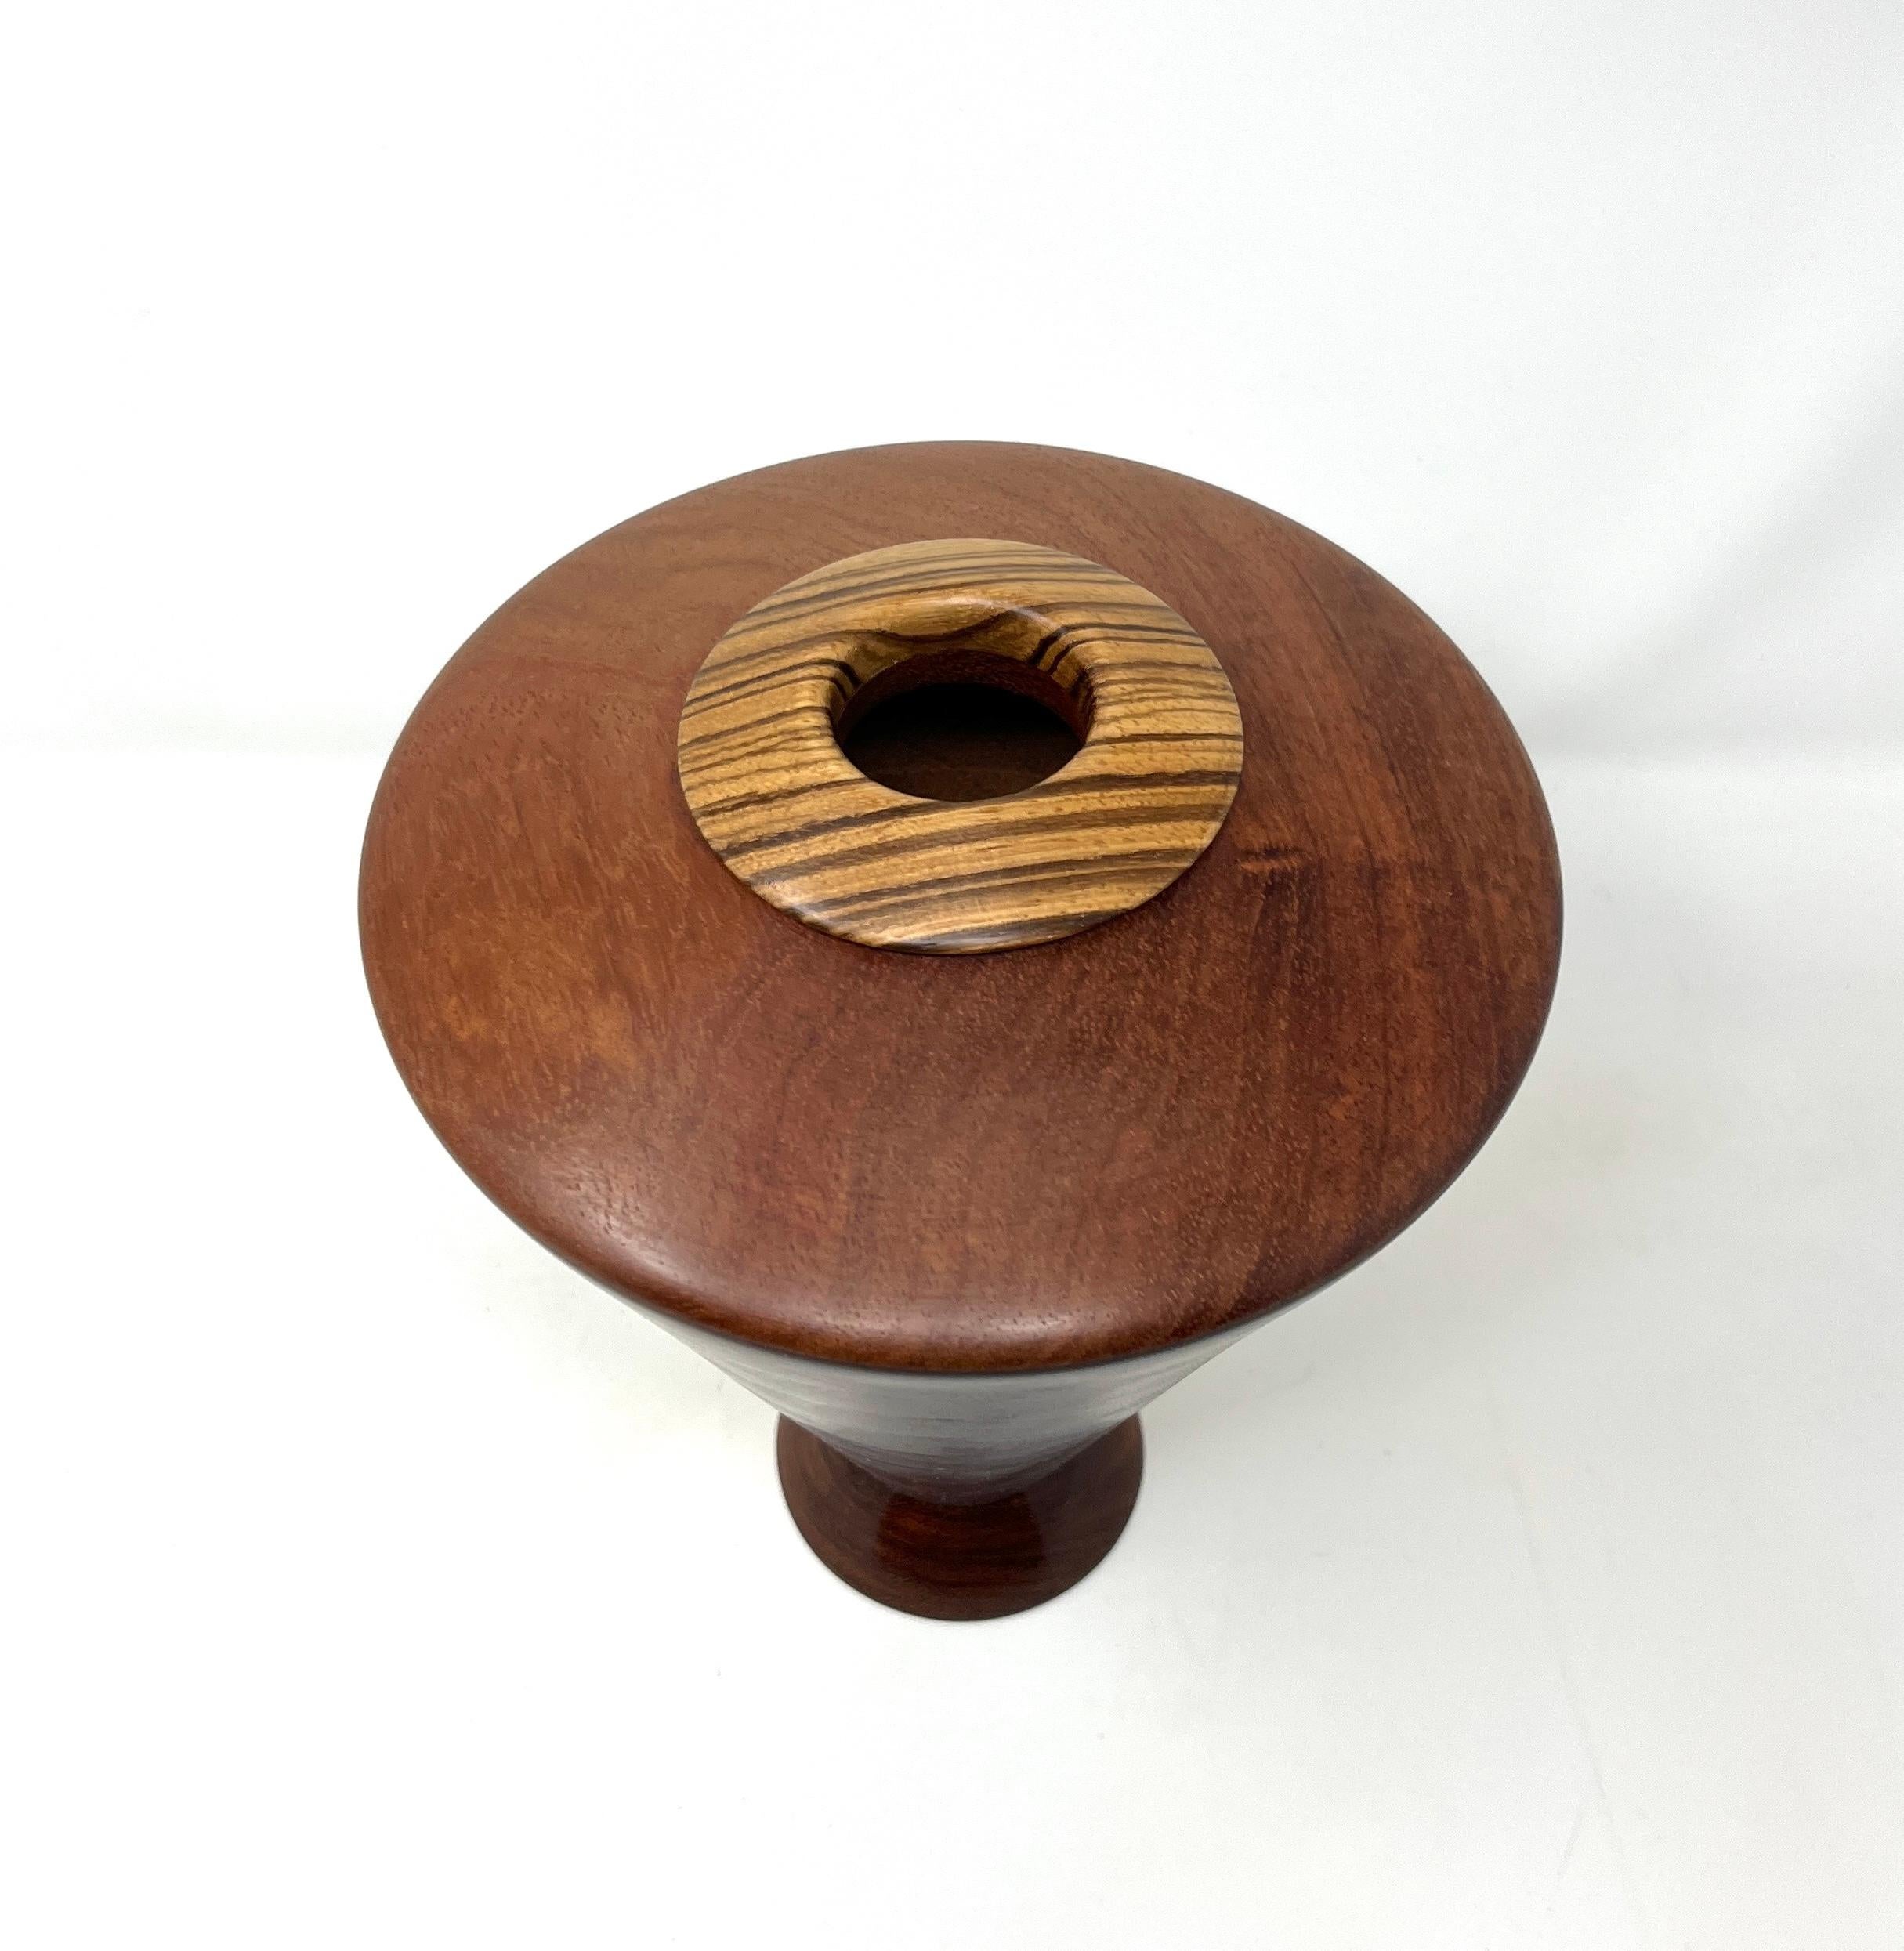 Post-Modern Handcrafted Turned Wood Sculptural Vase By Lloyd Cheney, 2002 For Sale